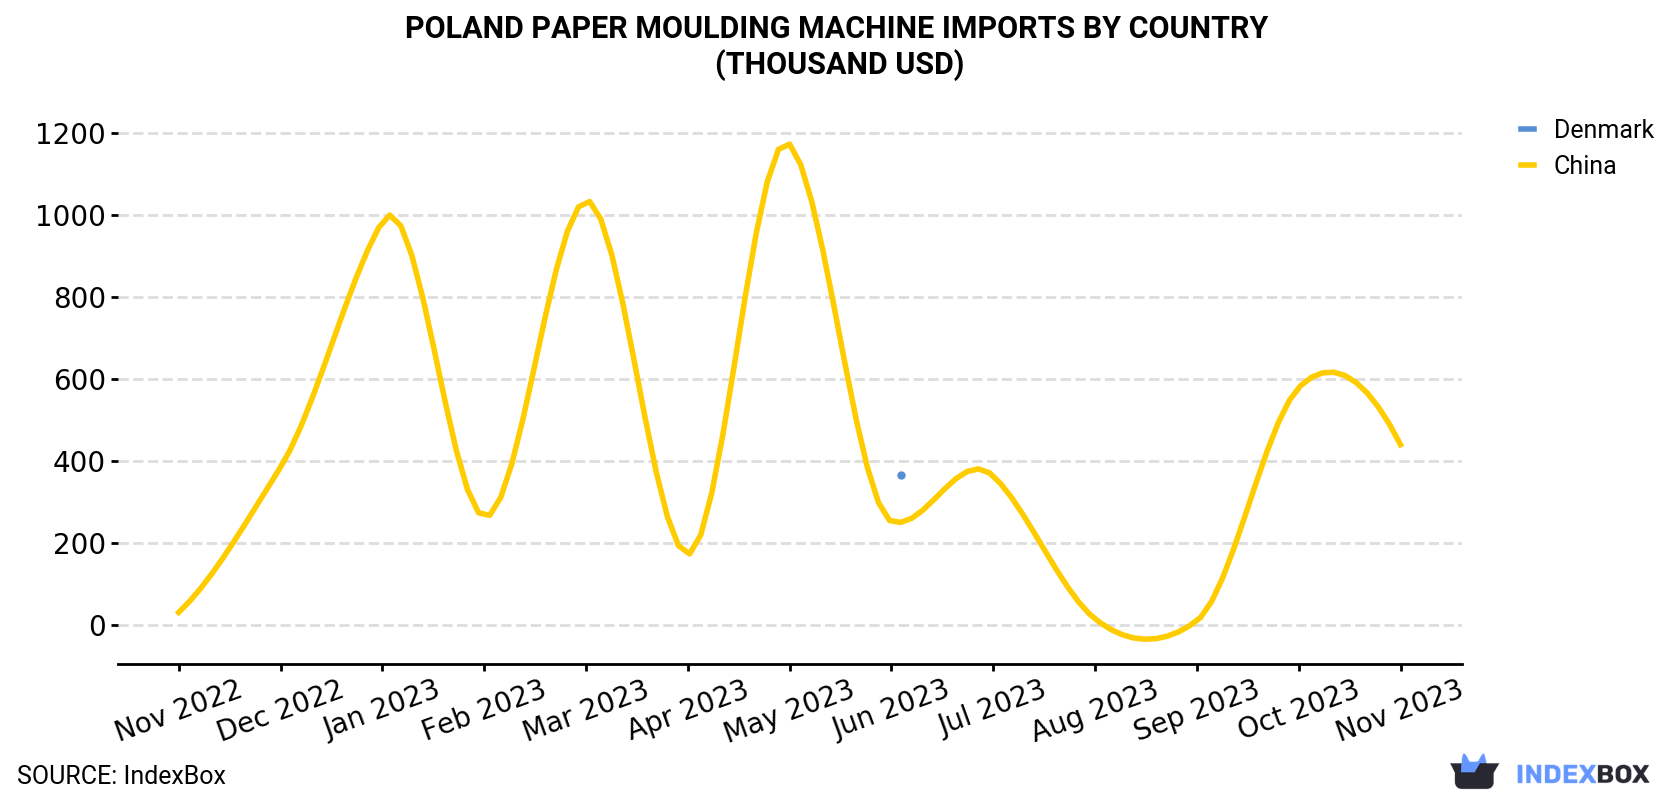 Poland Paper Moulding Machine Imports By Country (Thousand USD)